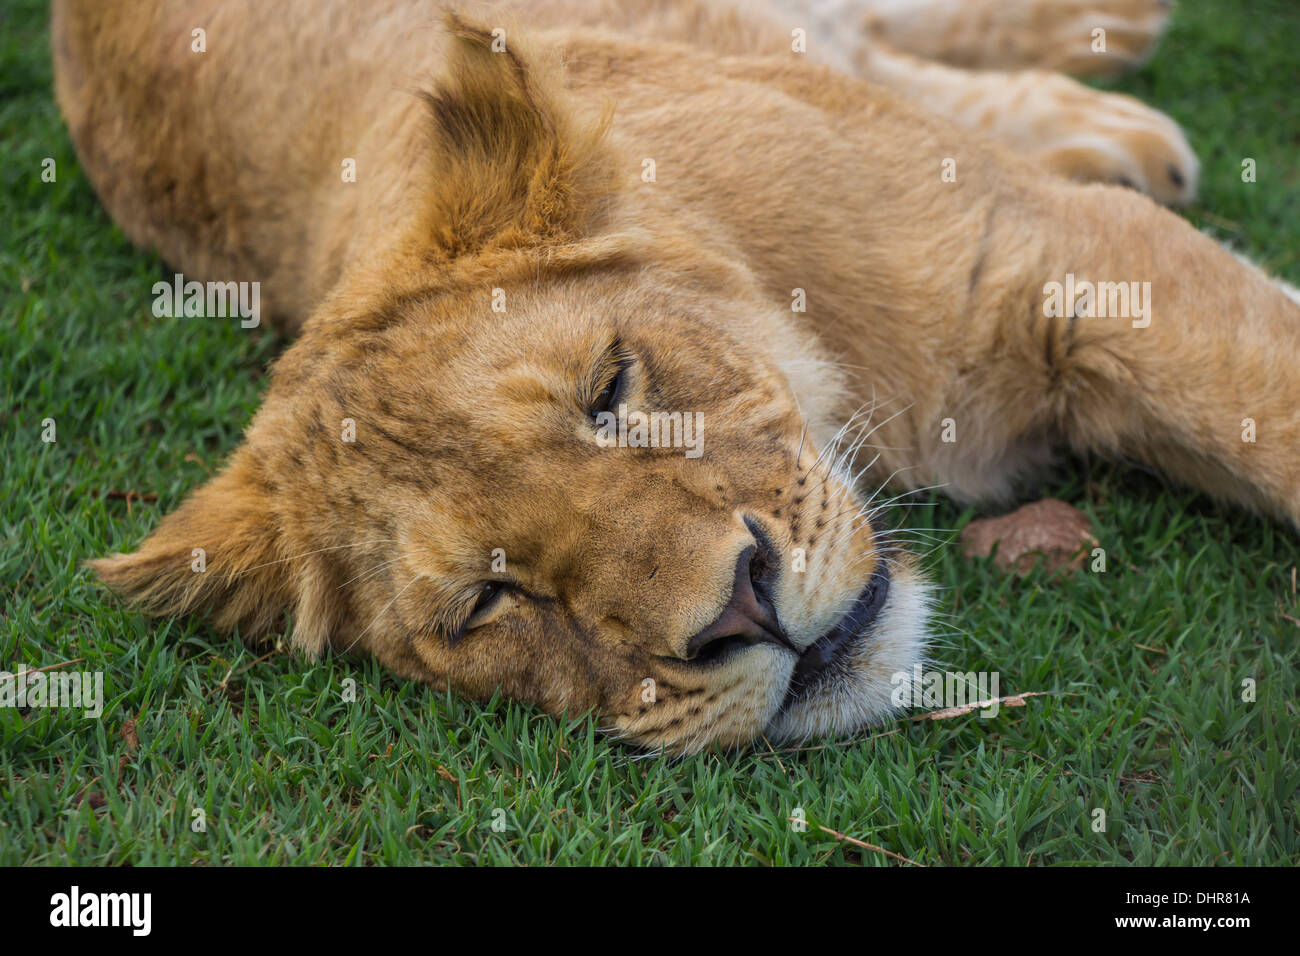 Close up of a Sleeping Lion Cub Stock Photo